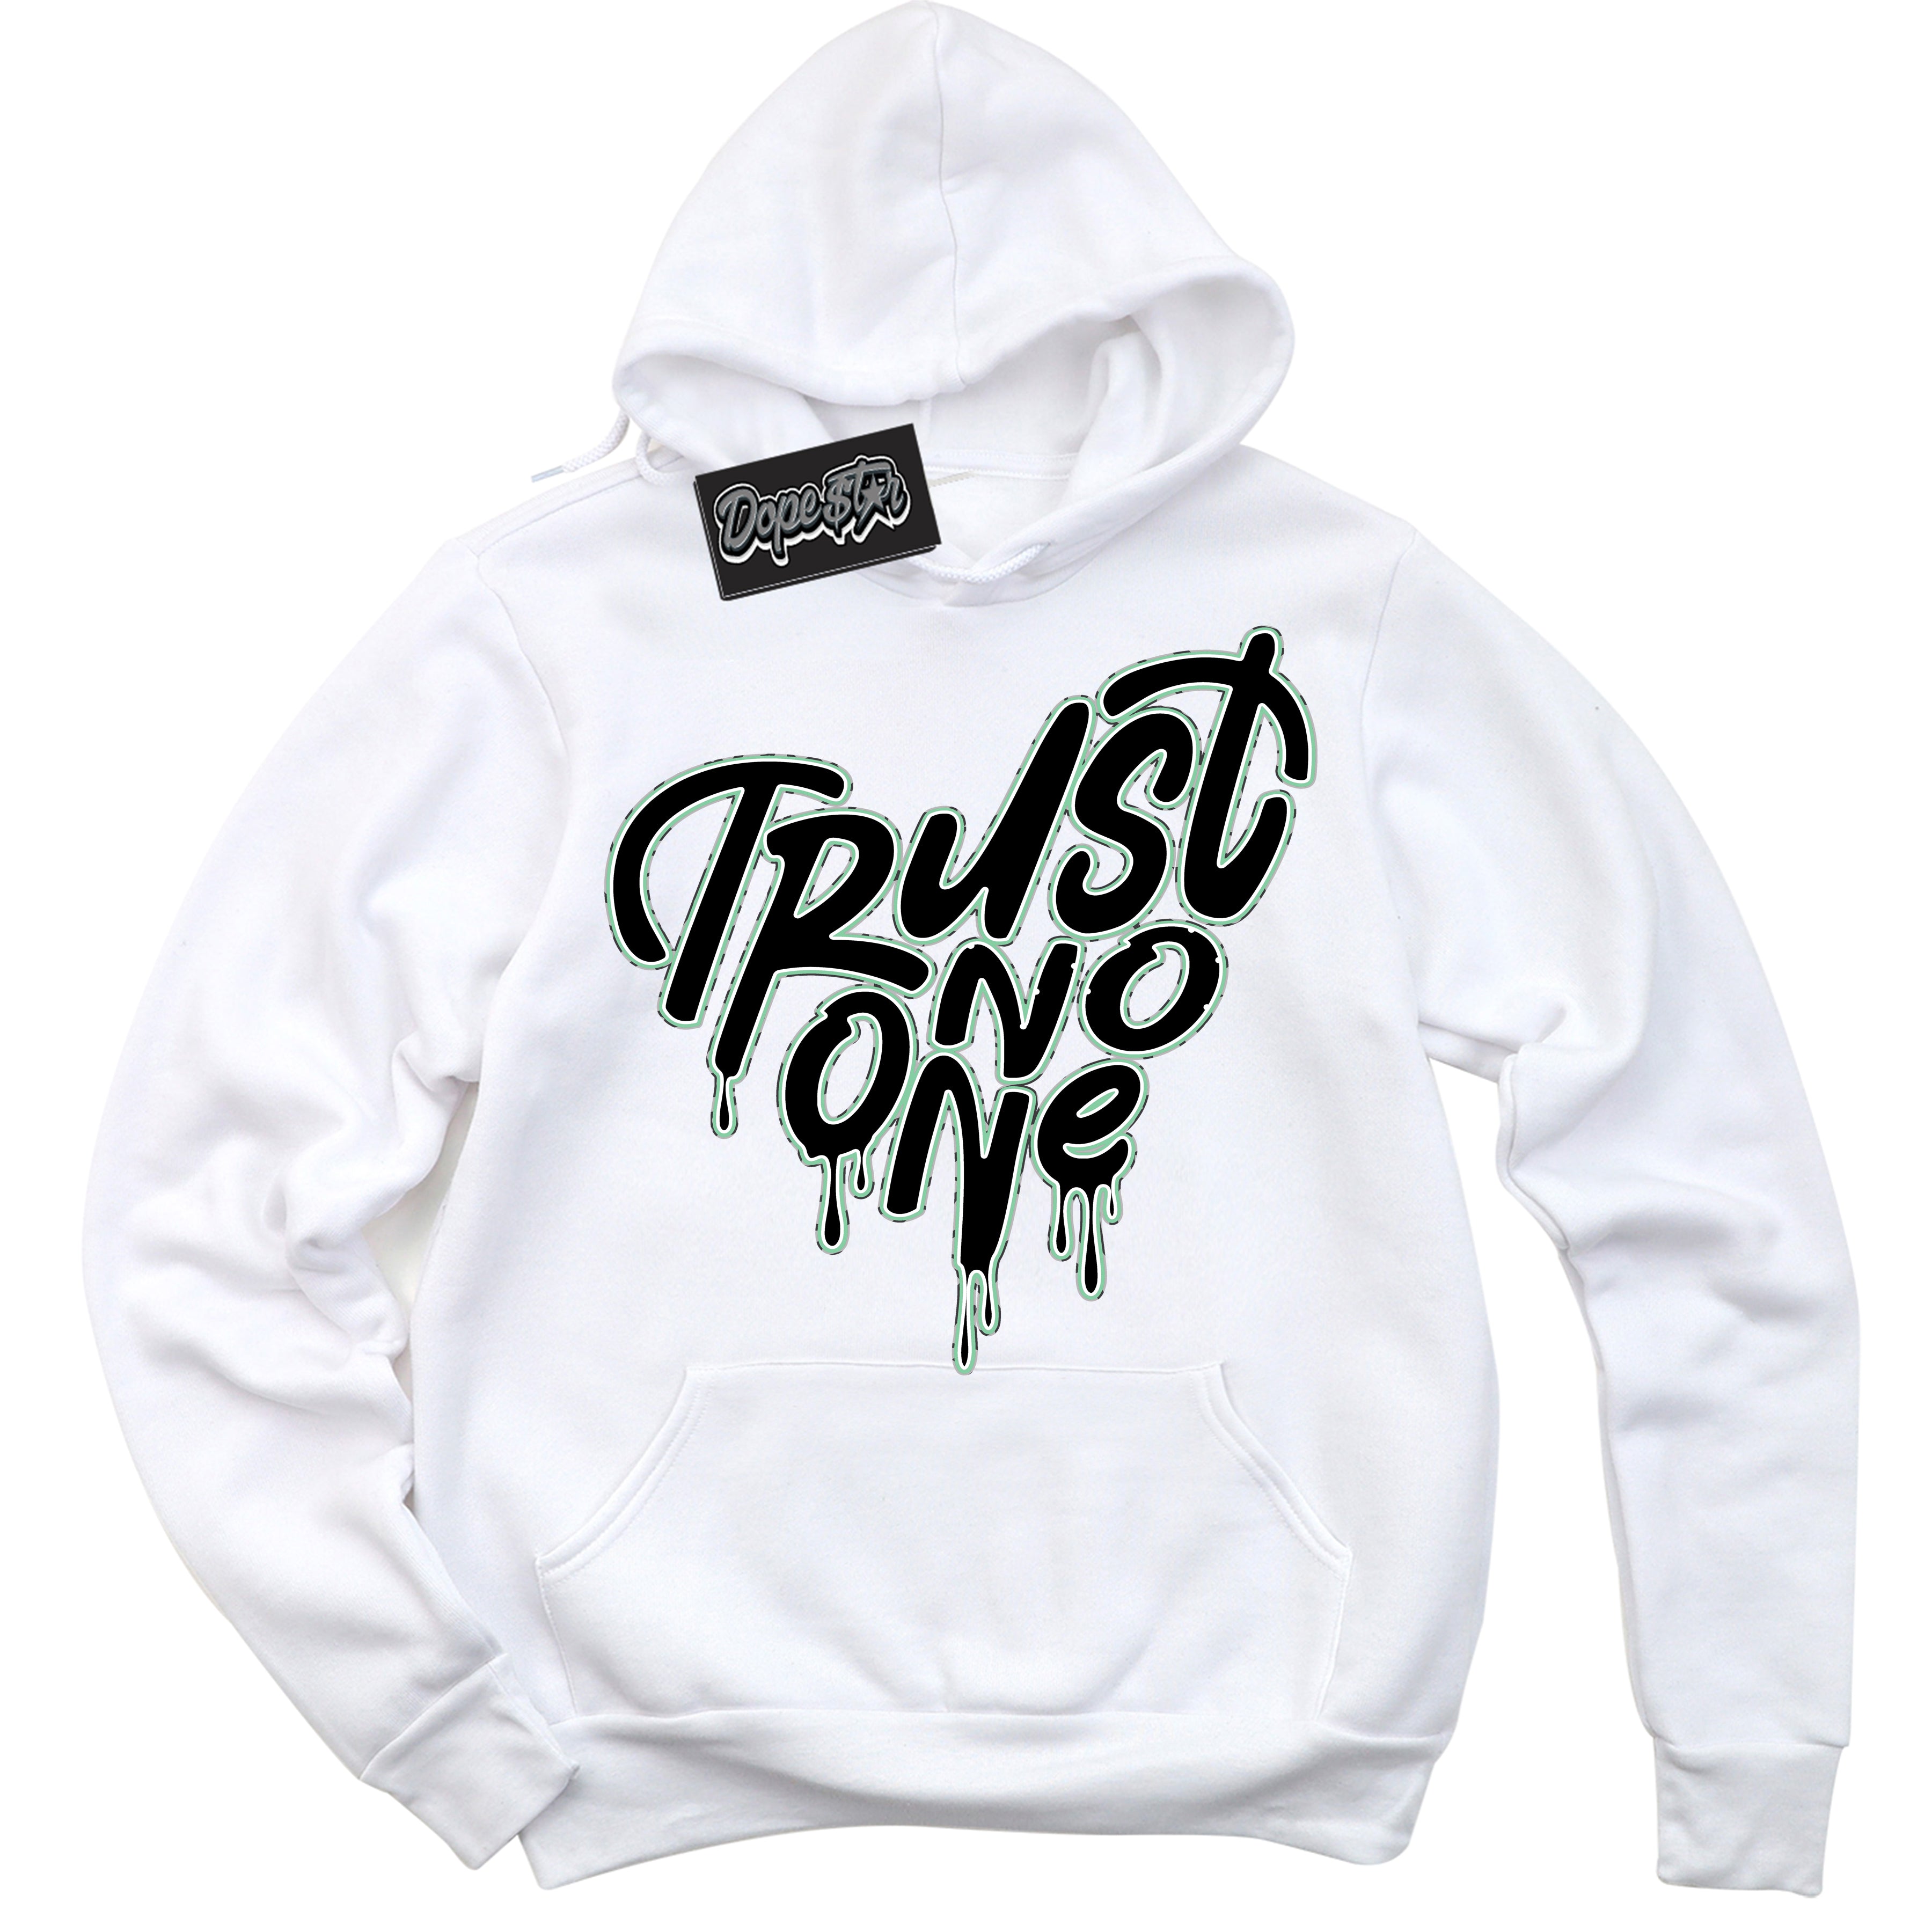 Cool White Graphic DopeStar Hoodie with “ Trust No One Heart “ print, that perfectly matches Green Glow 3s sneakers